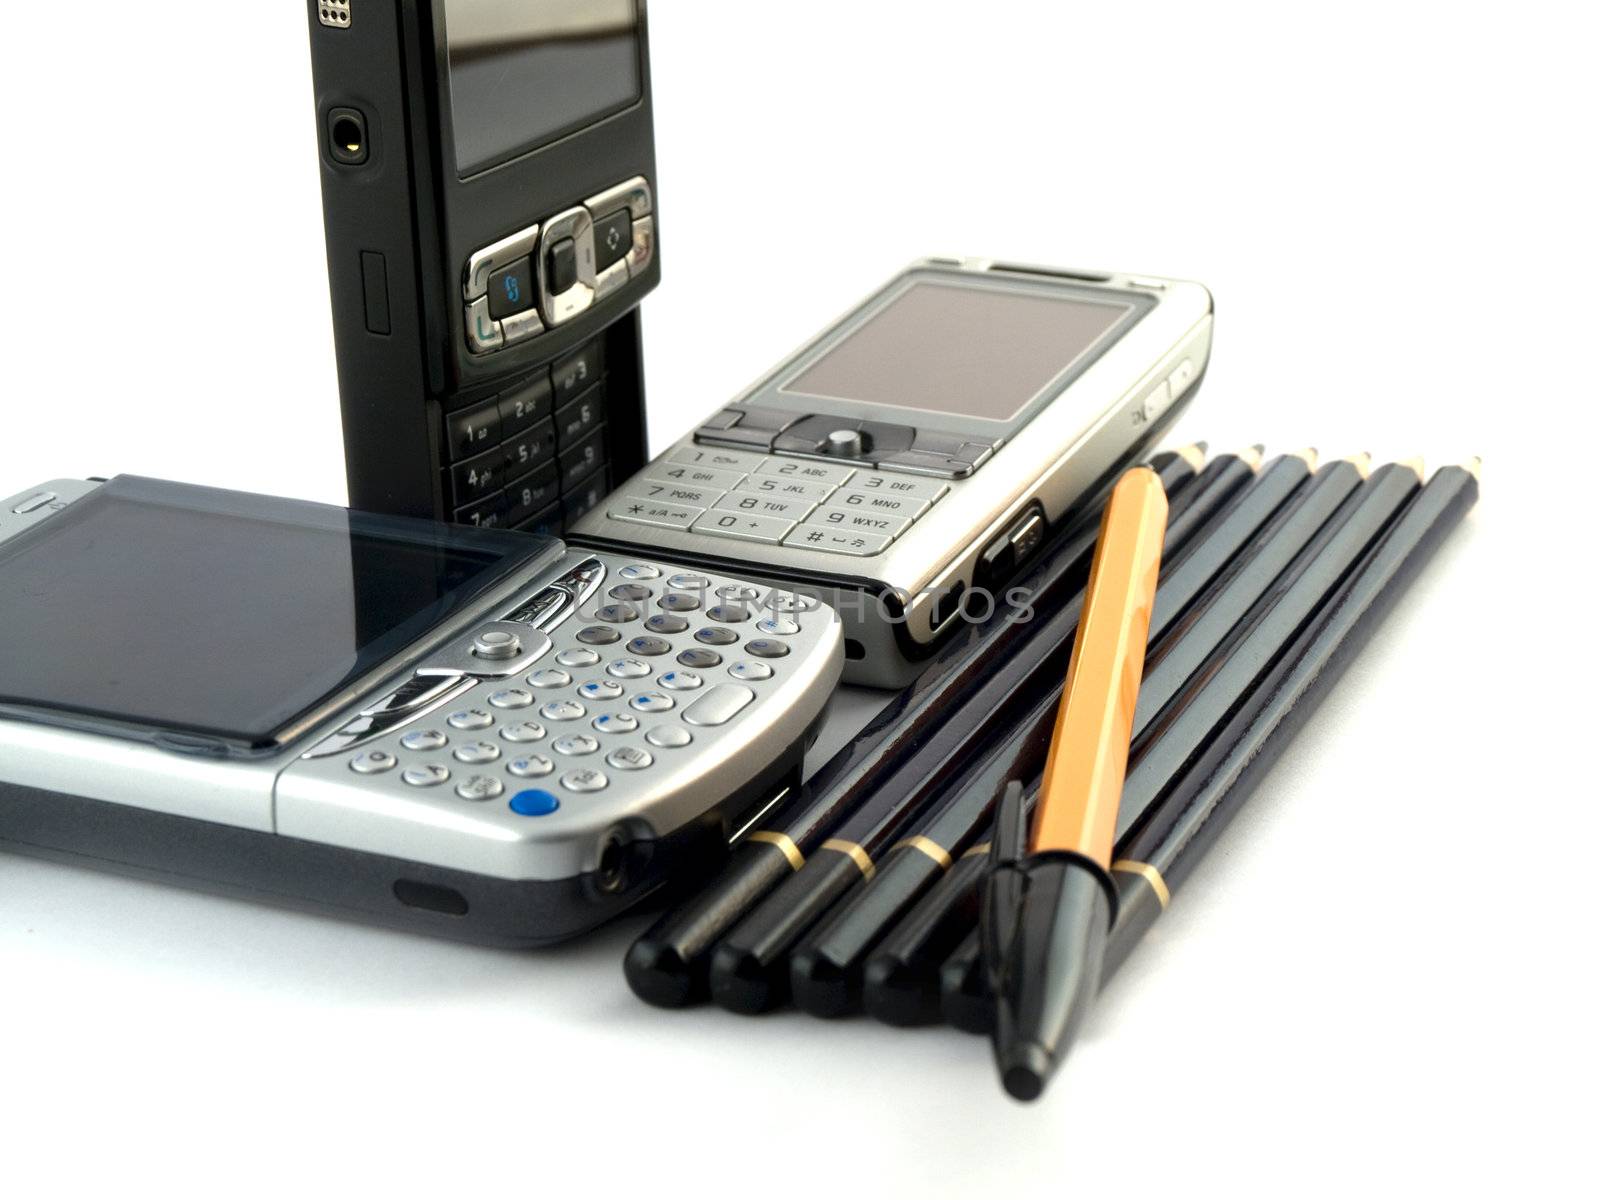 Modern Mobile Phones Pens and Pencils on White Background